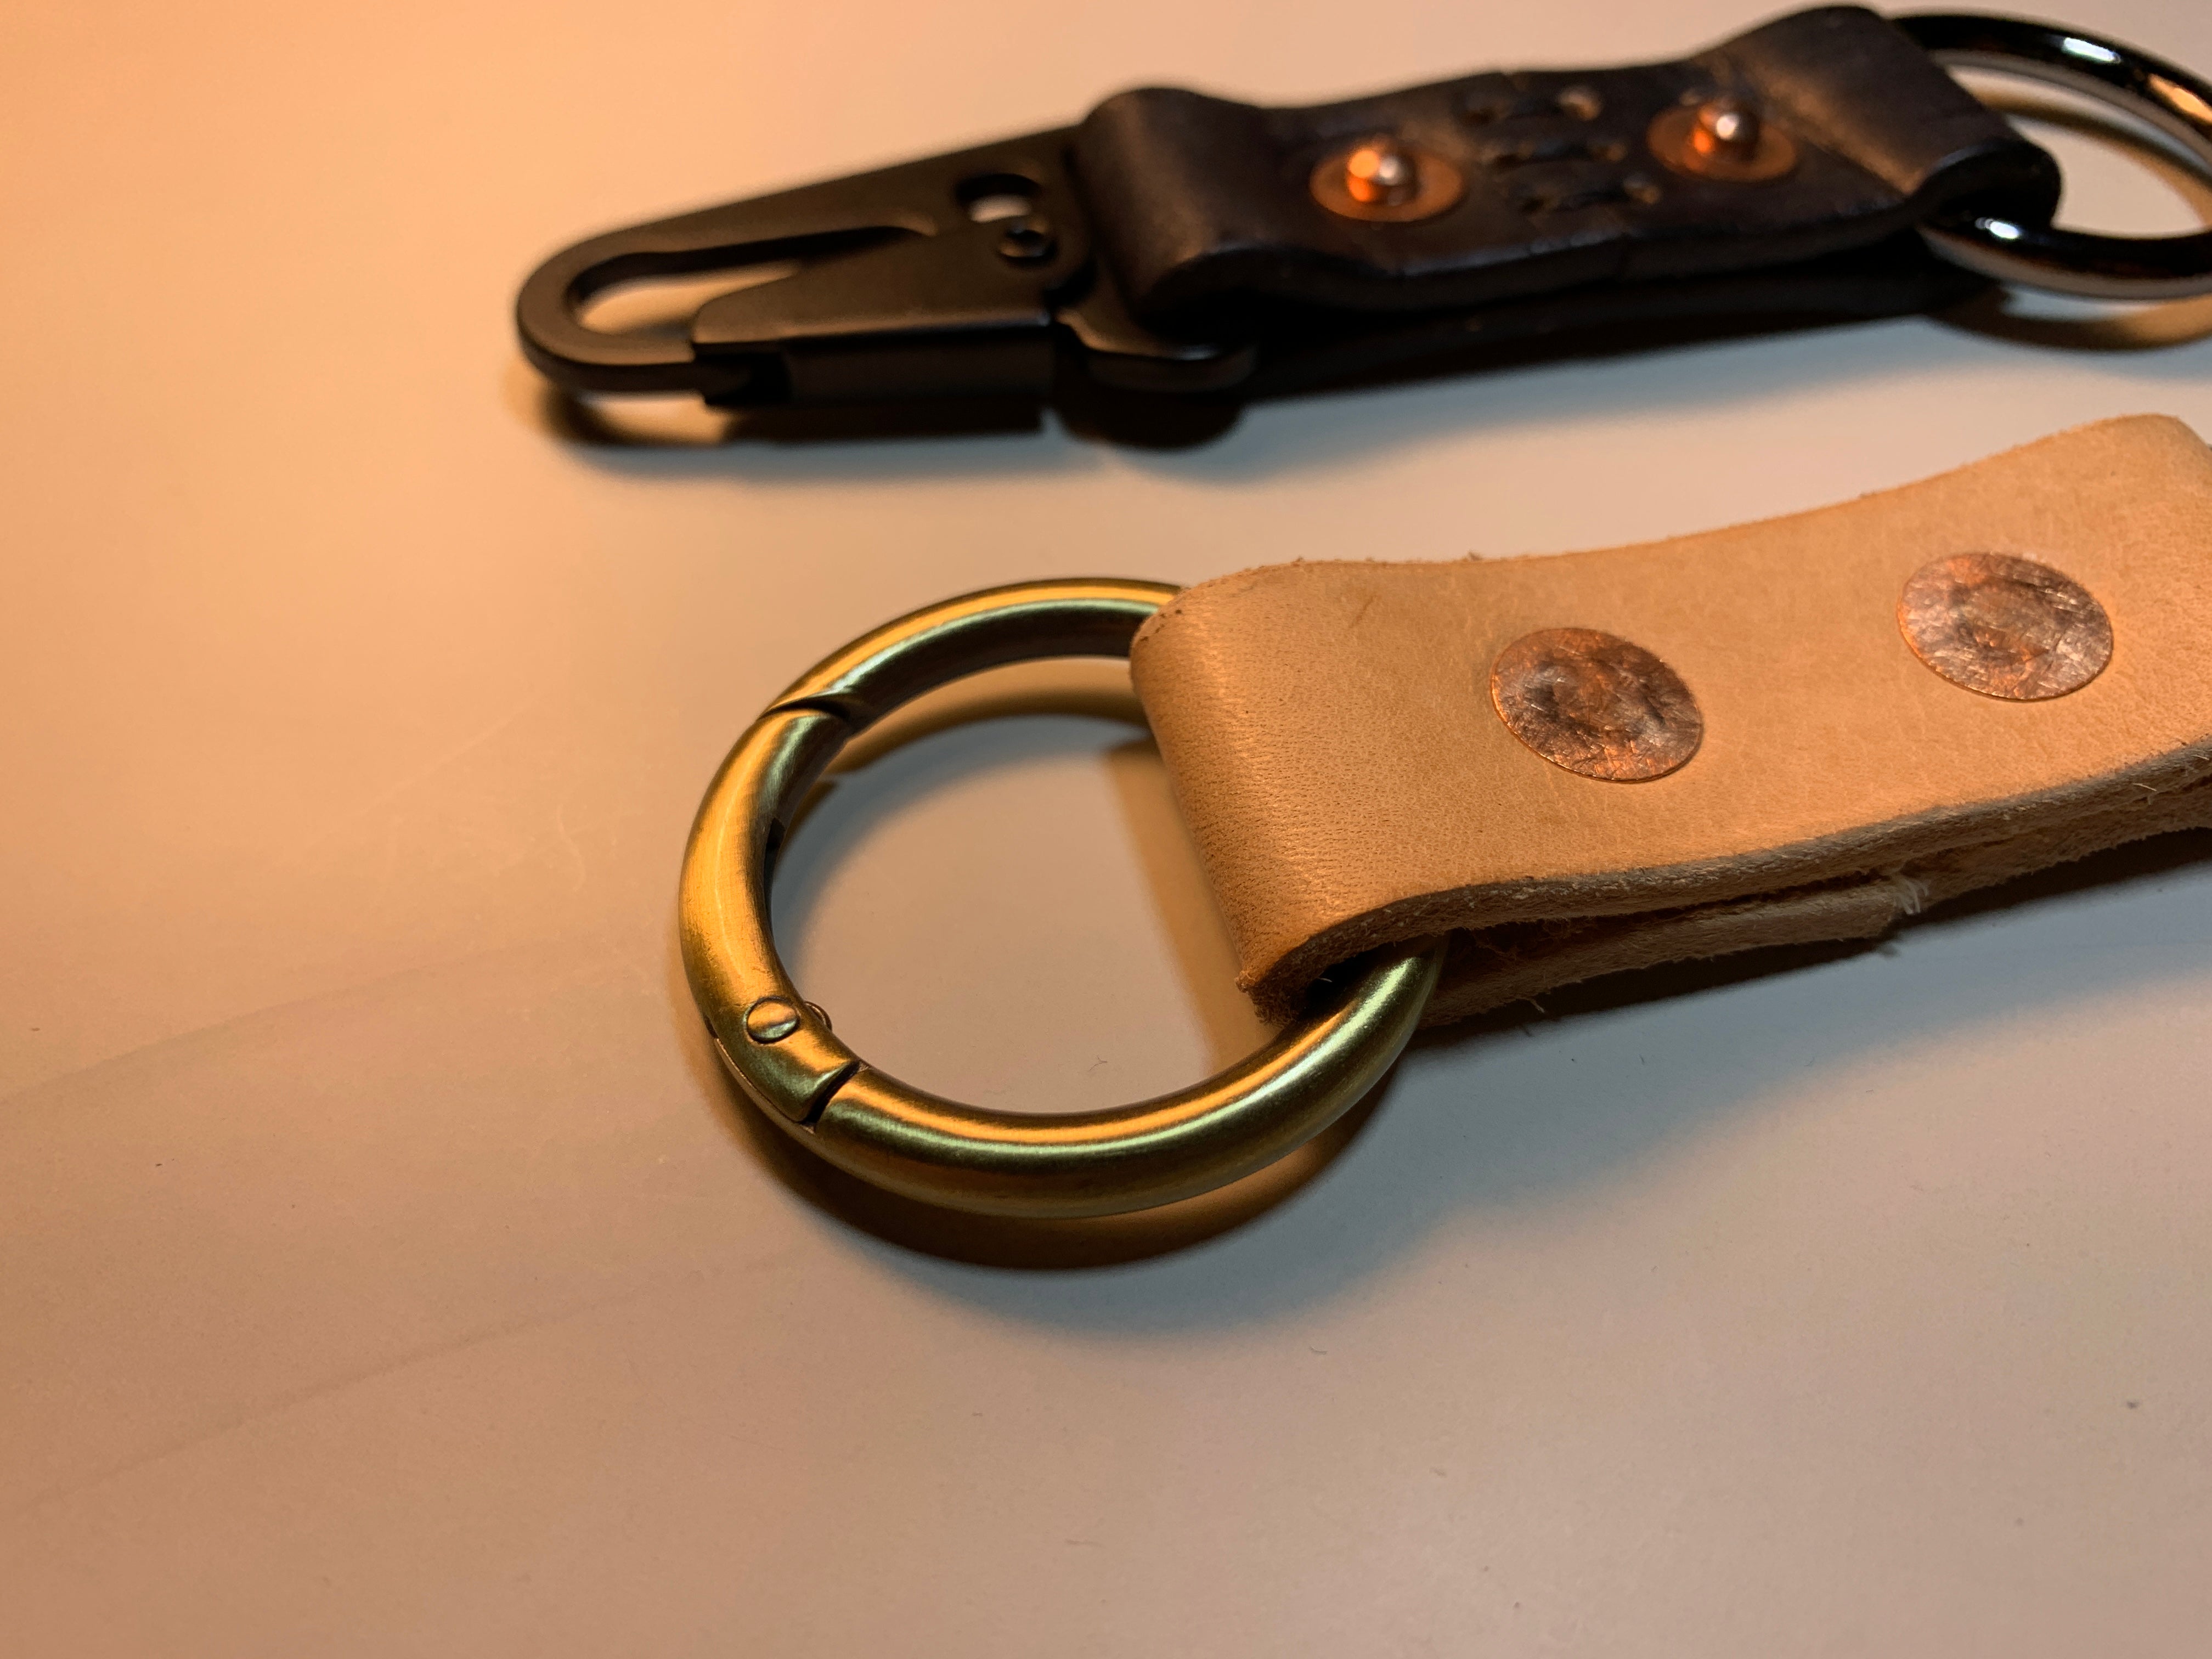 Keychain with H&K sling clip